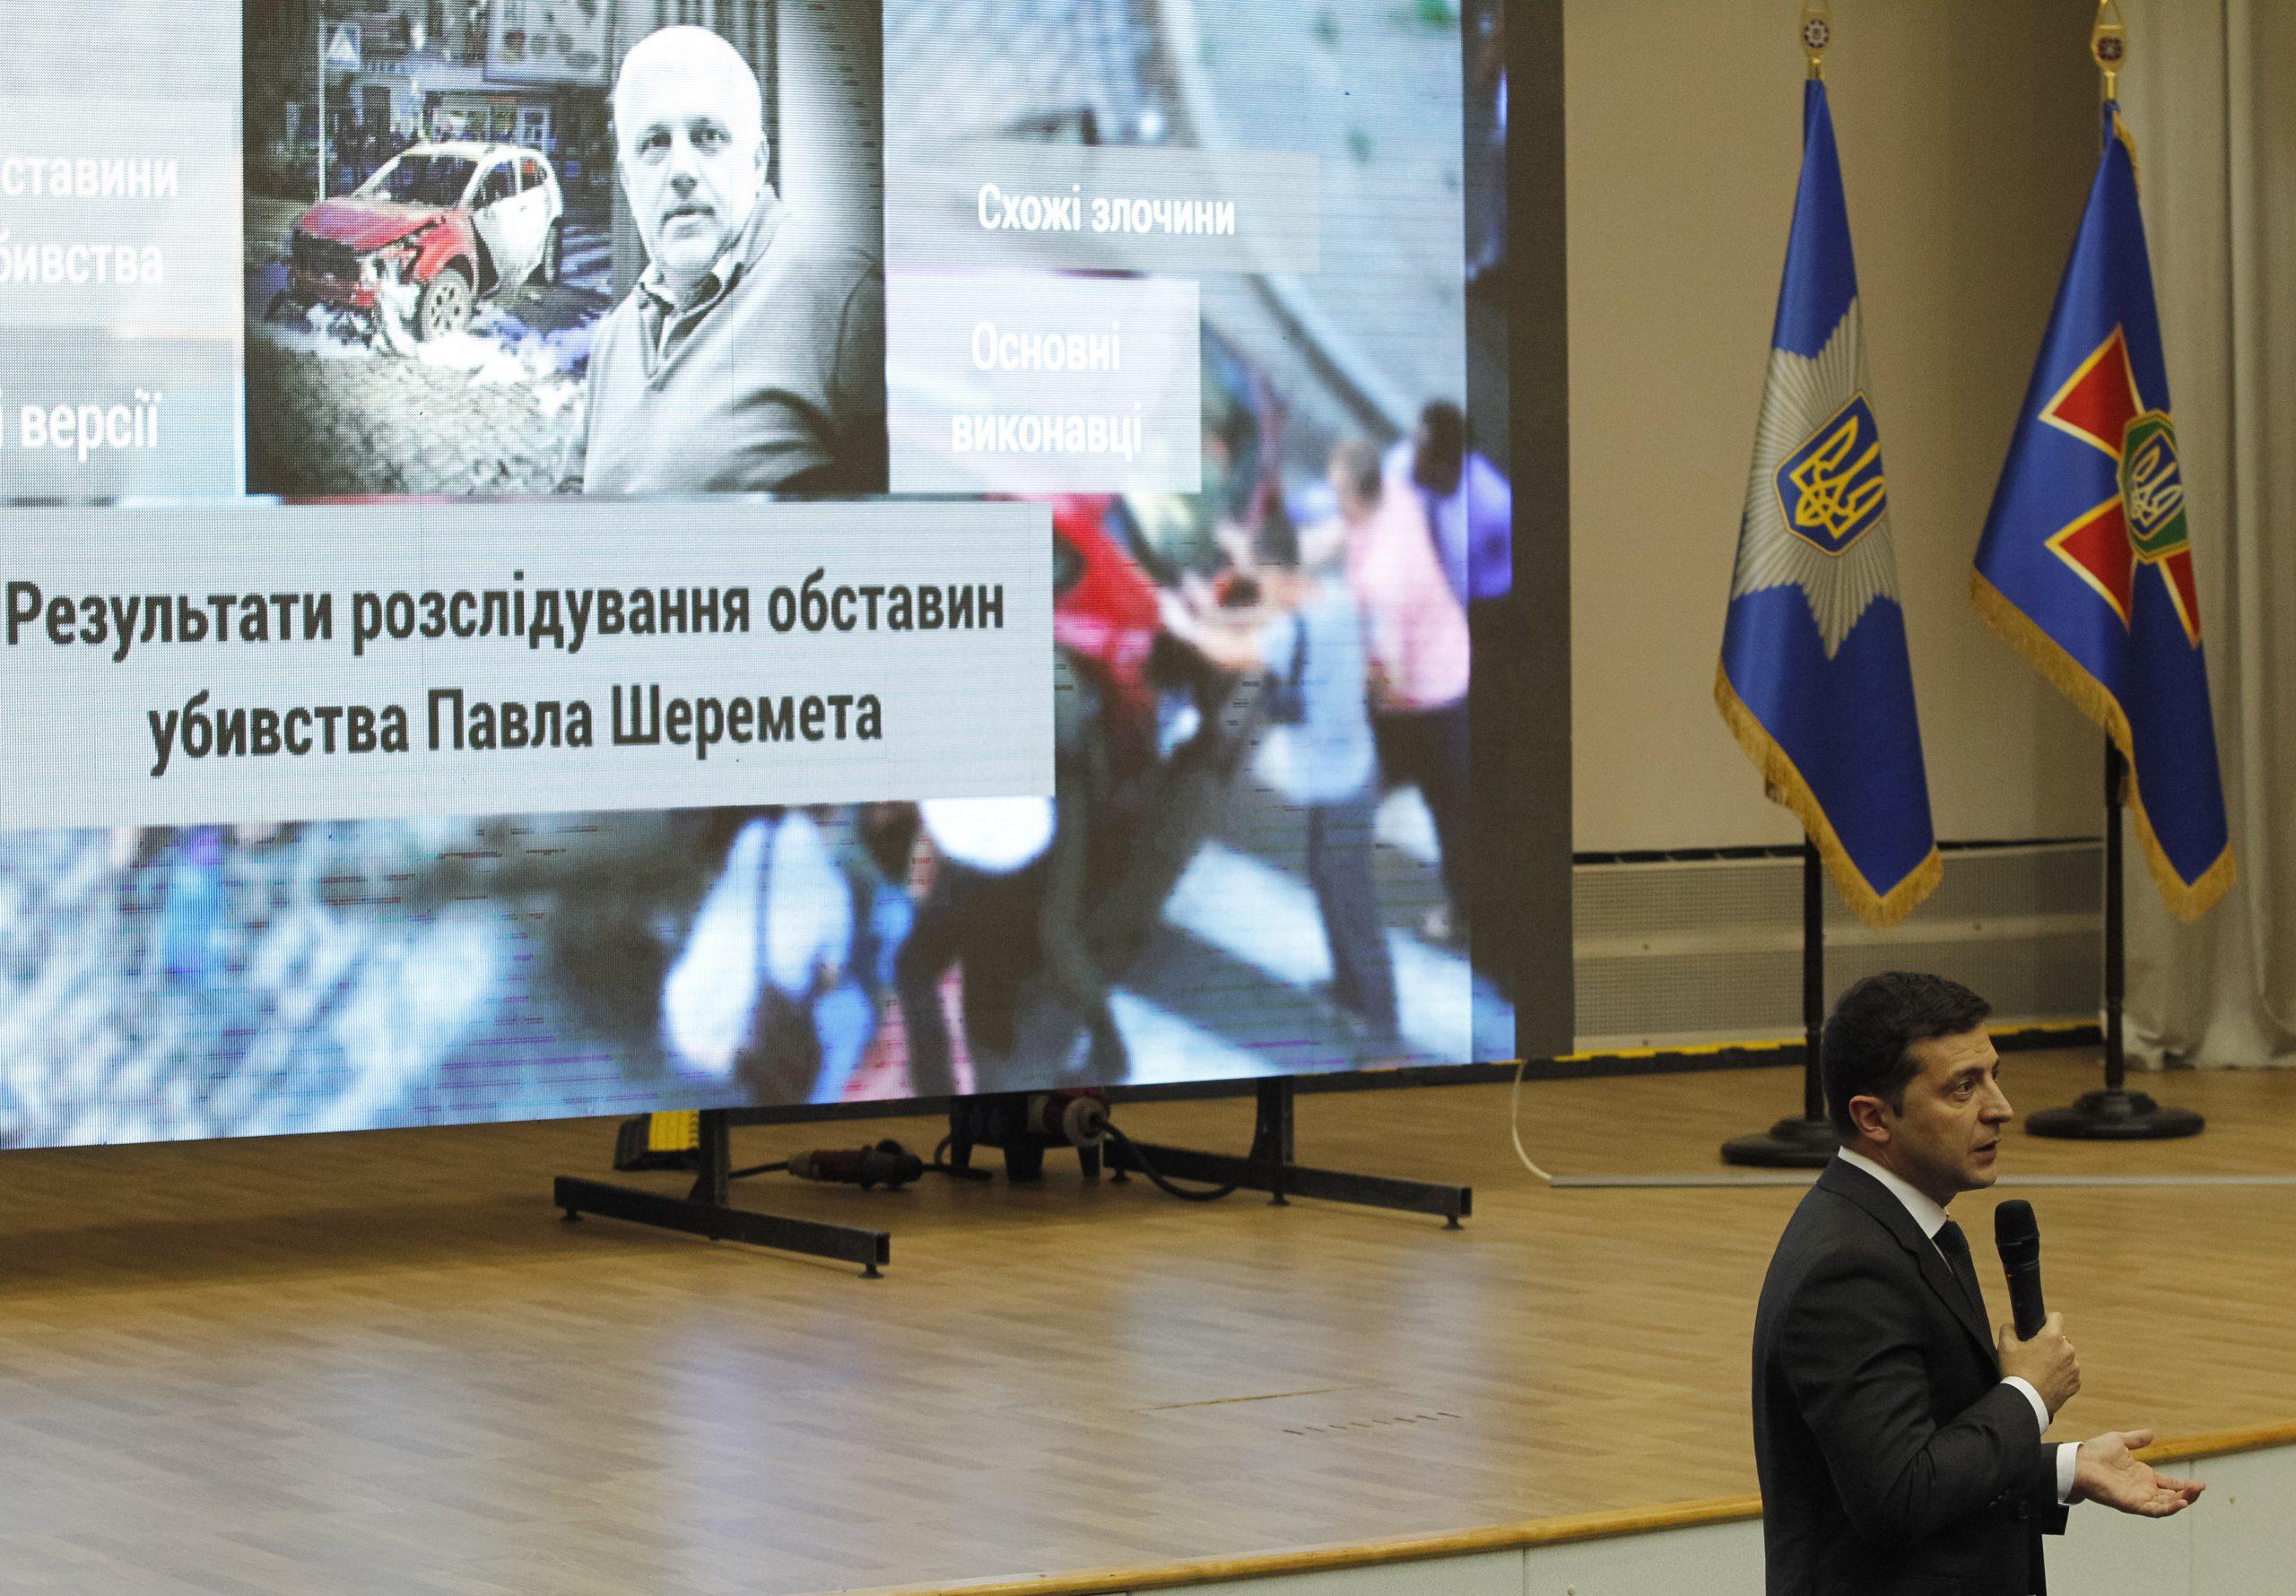 epa08066087 Ukrainian President Volodymyr Zelensky speaks about the results of an investigate in the murder of journalist Pavel Sheremet in 2016, during a press-conference in the Ministry of Internal Affairs in Kiev, Ukraine, 12 December 2019. Five people are suspected of involvement in the murder of journalist Pavel Sheremet in the summer of 2016.  EPA/STEPAN FRANKO